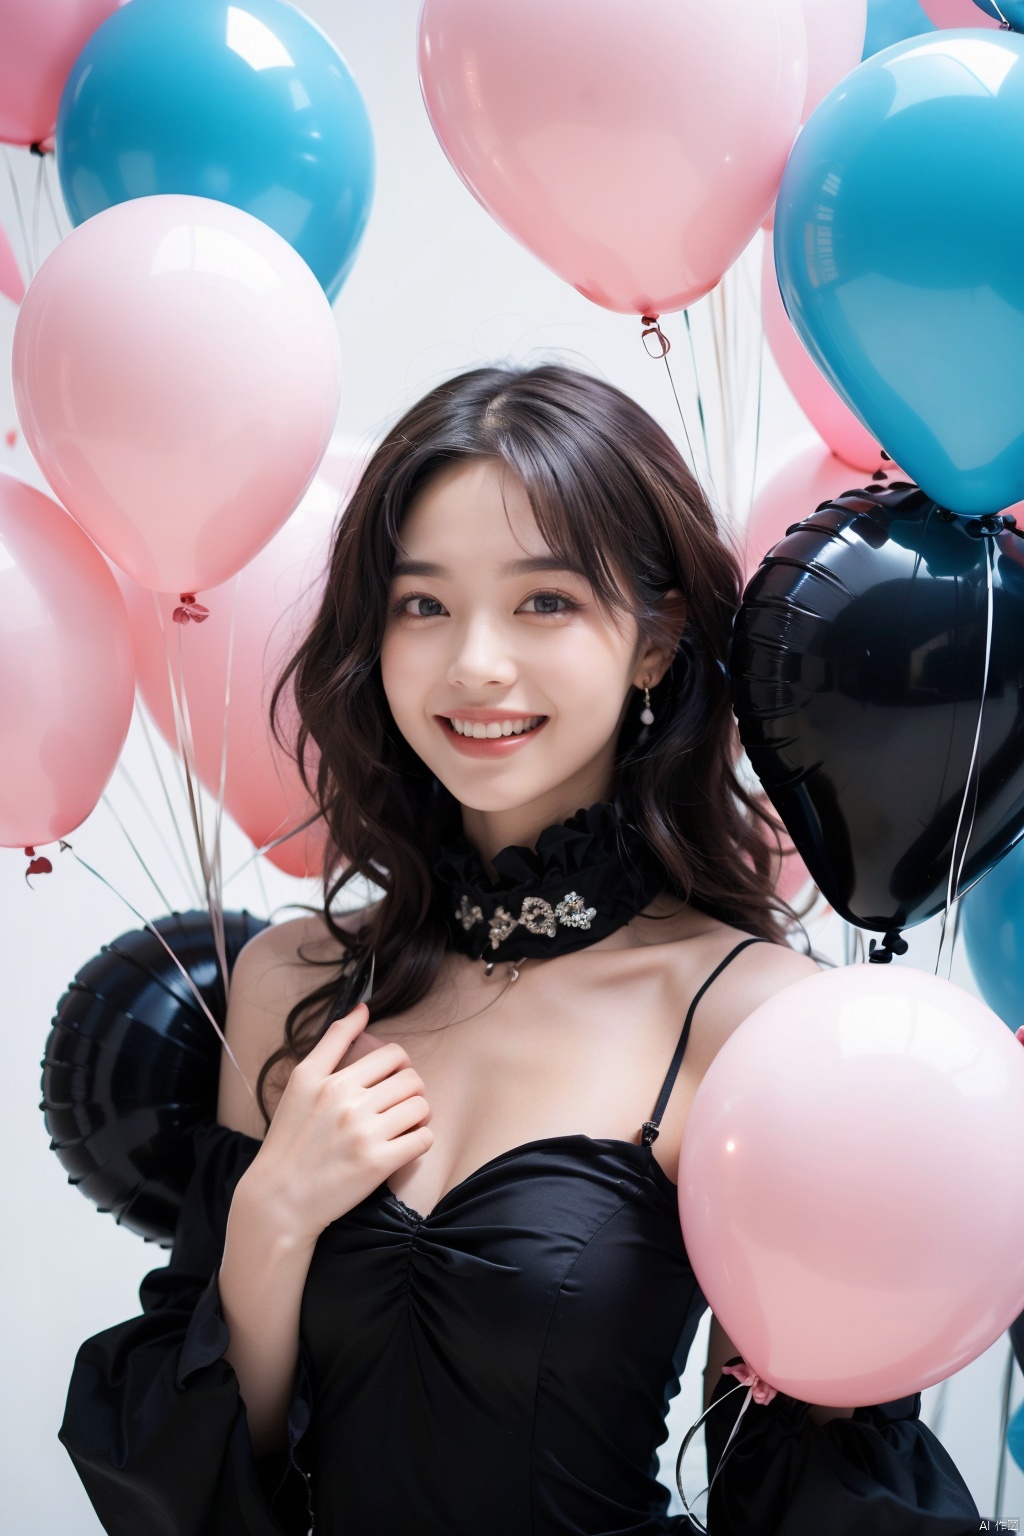 Upper body. (1 girl). Black dress, holding a book. Heart-shaped balloon surrounded by colorful black balloons. Portrait of a smiling girl, happy, joyful, celebrating, innocent, young. Rose background with vibrant colors. High-quality image, full HD, sharp focus, dreamy background, soft colors.